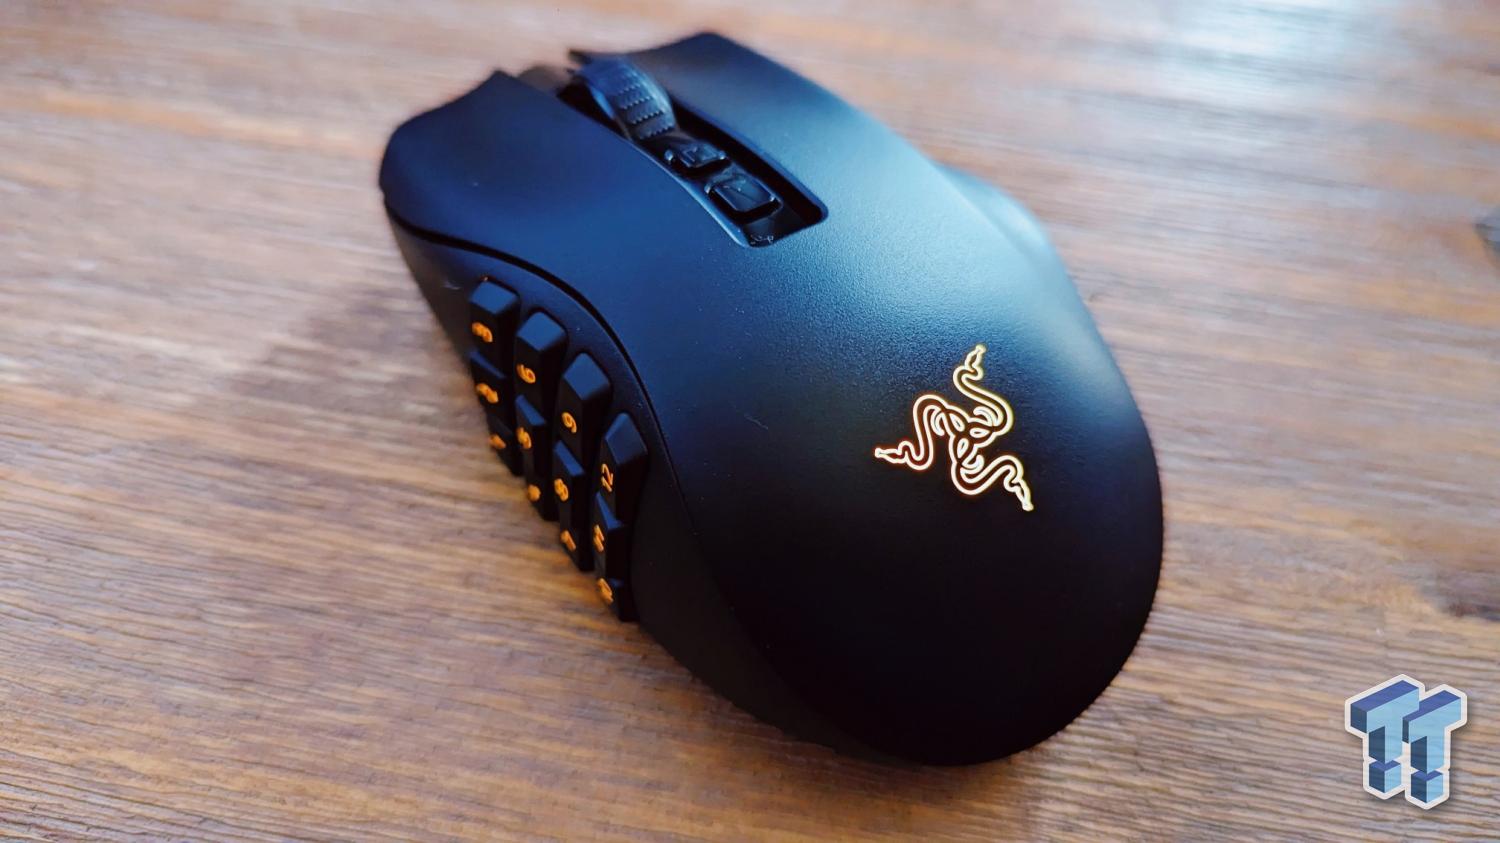 Razer Naga Pro, A Premium Gaming Mouse That Is Cool For Editing